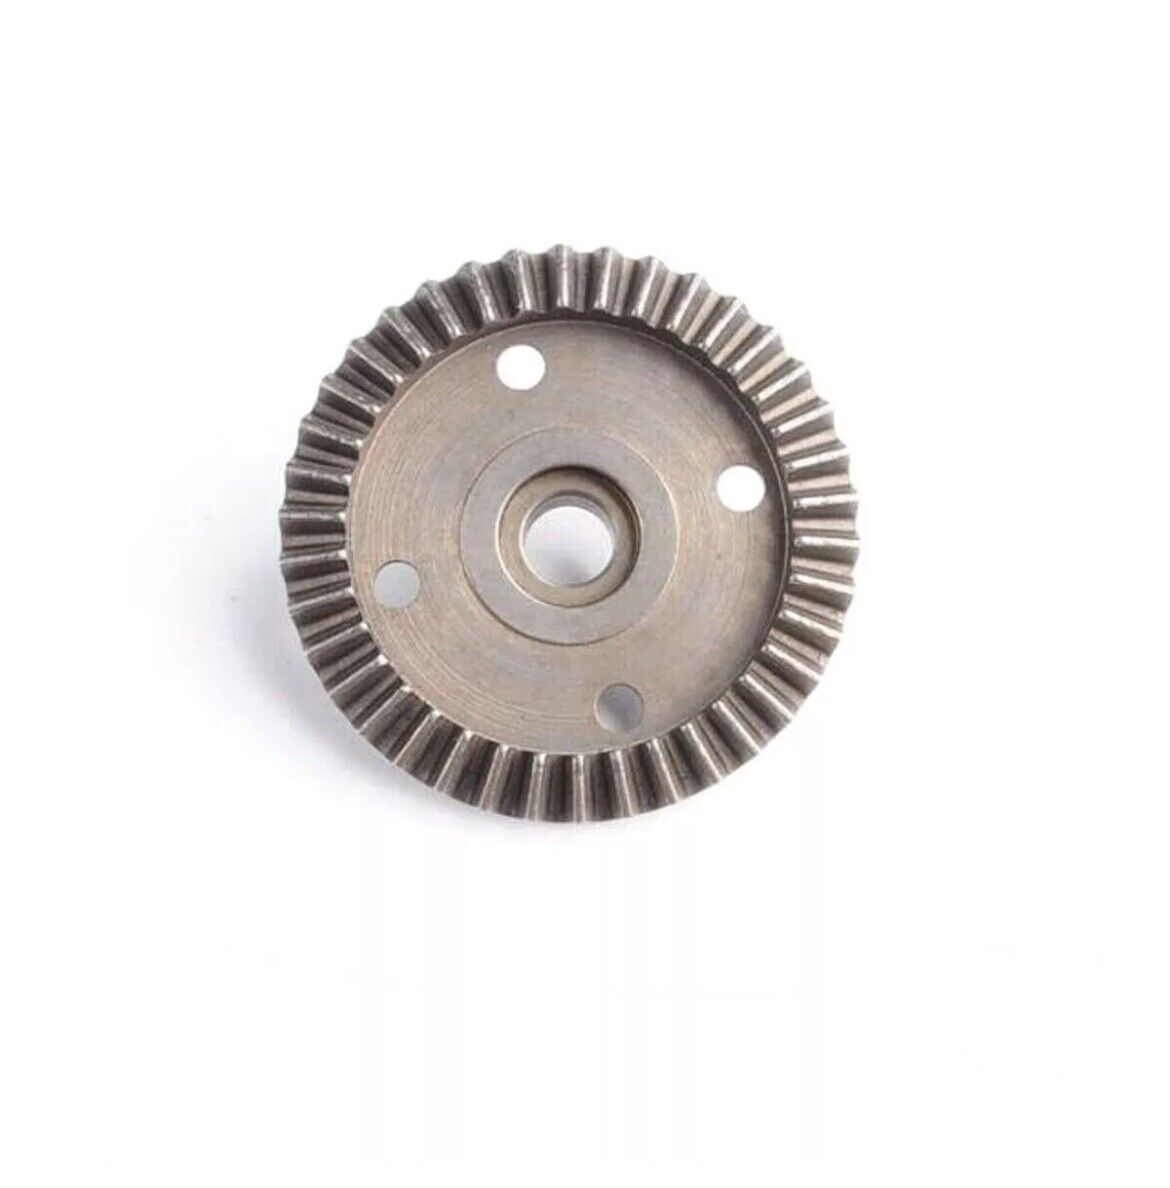 HSP 60098 Diff. Gear 38T Teeth 1/8 RC Car Buggy Truck Spare Parts Redcat Himoto